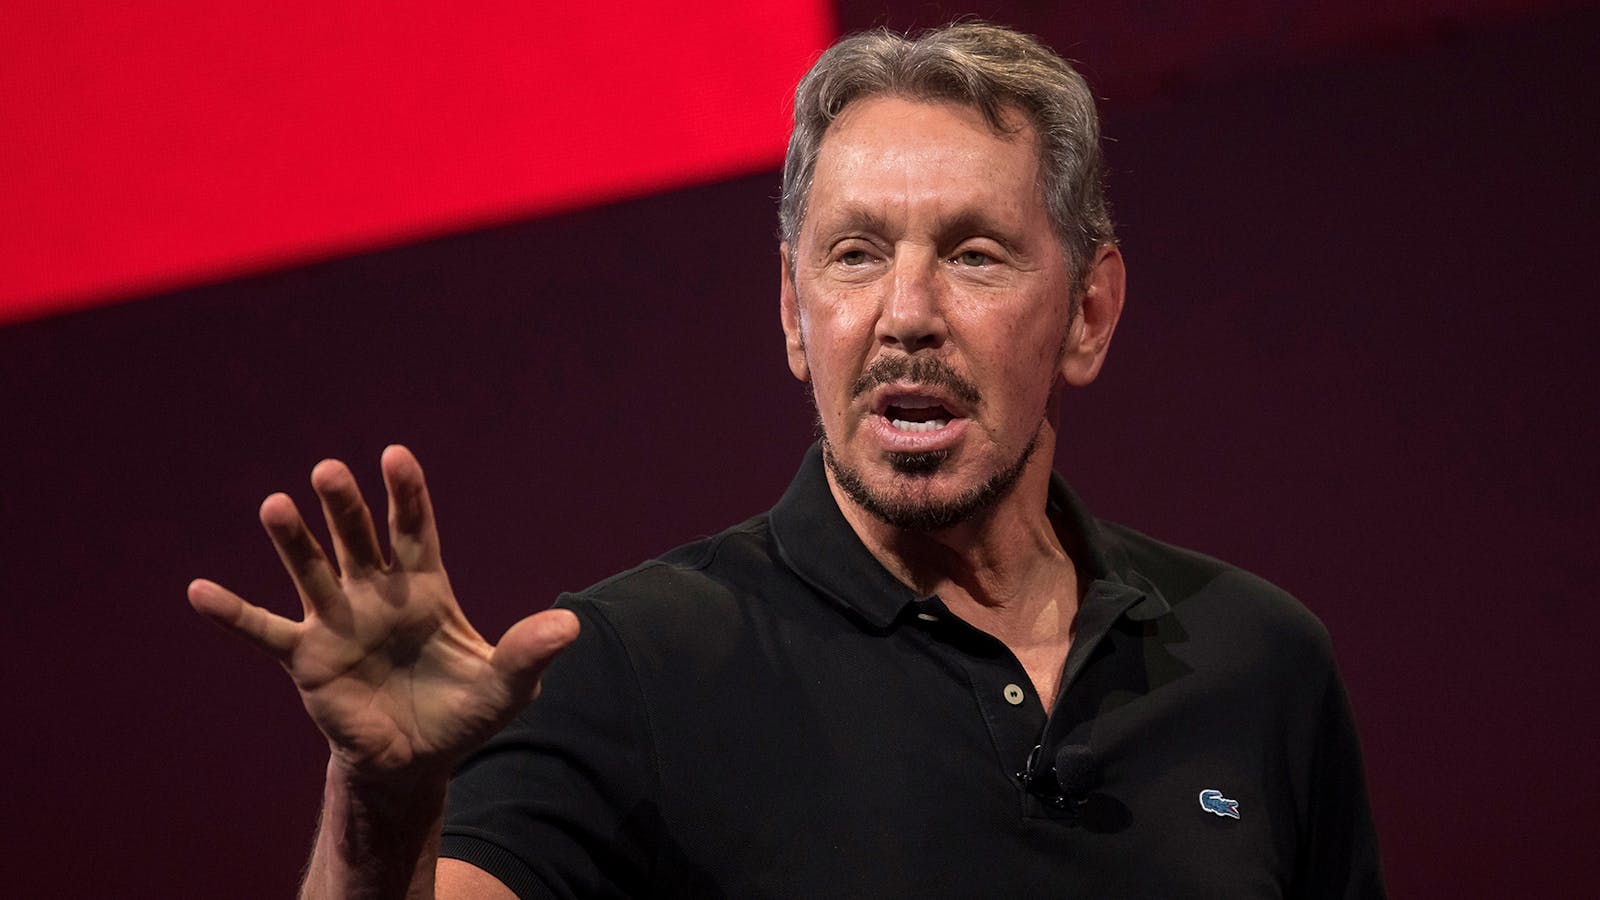 Oracle co-founder Larry Ellison. Photo: Bloomberg